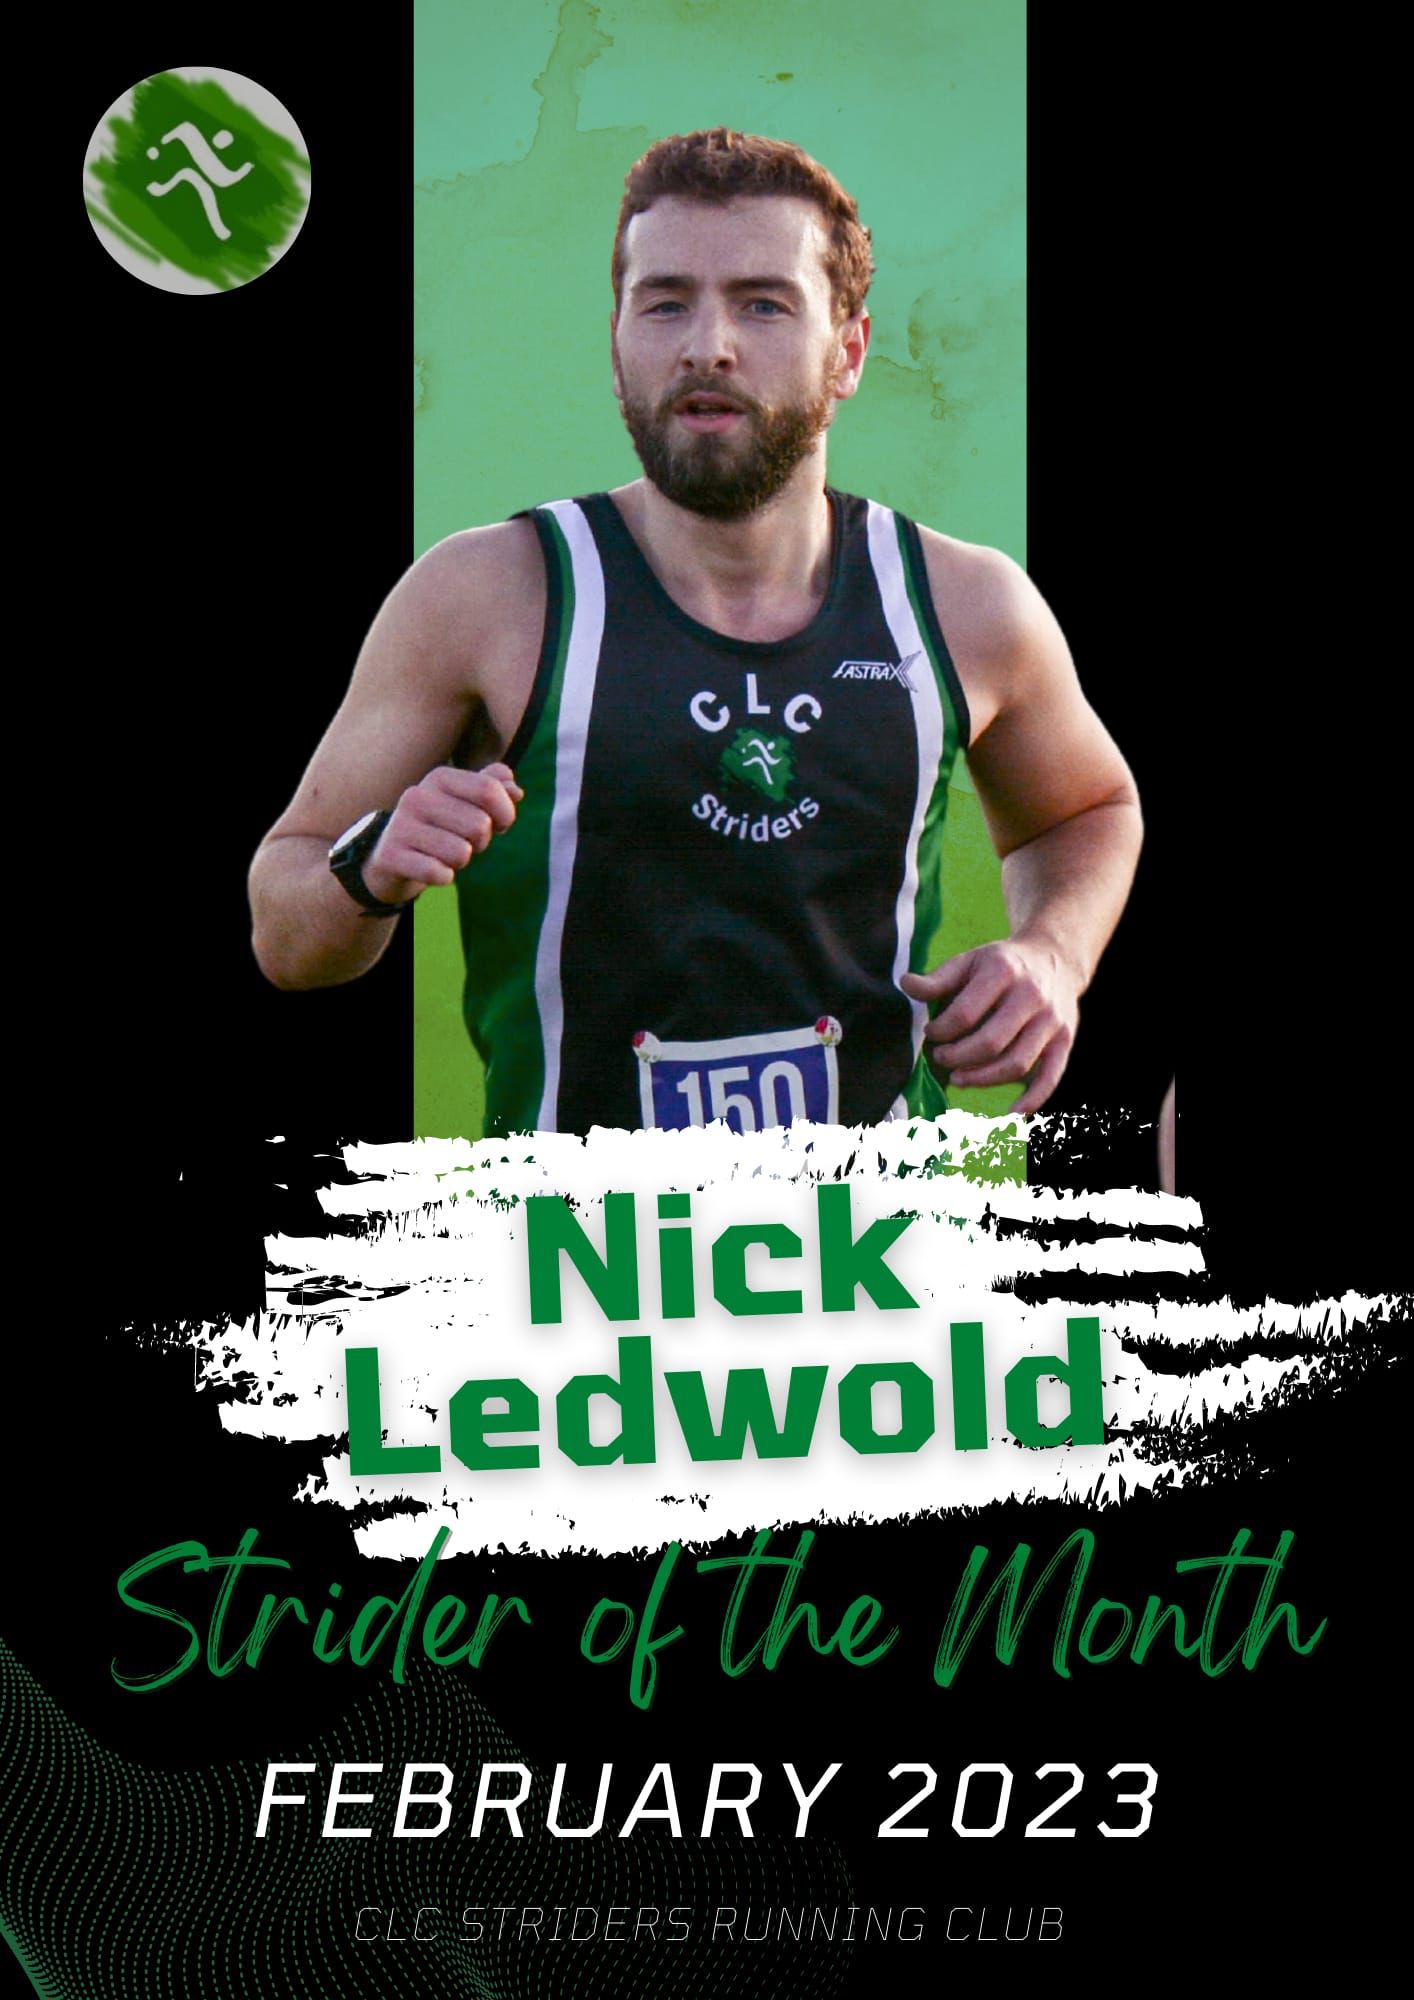 Strider of the month Nick Ledwold